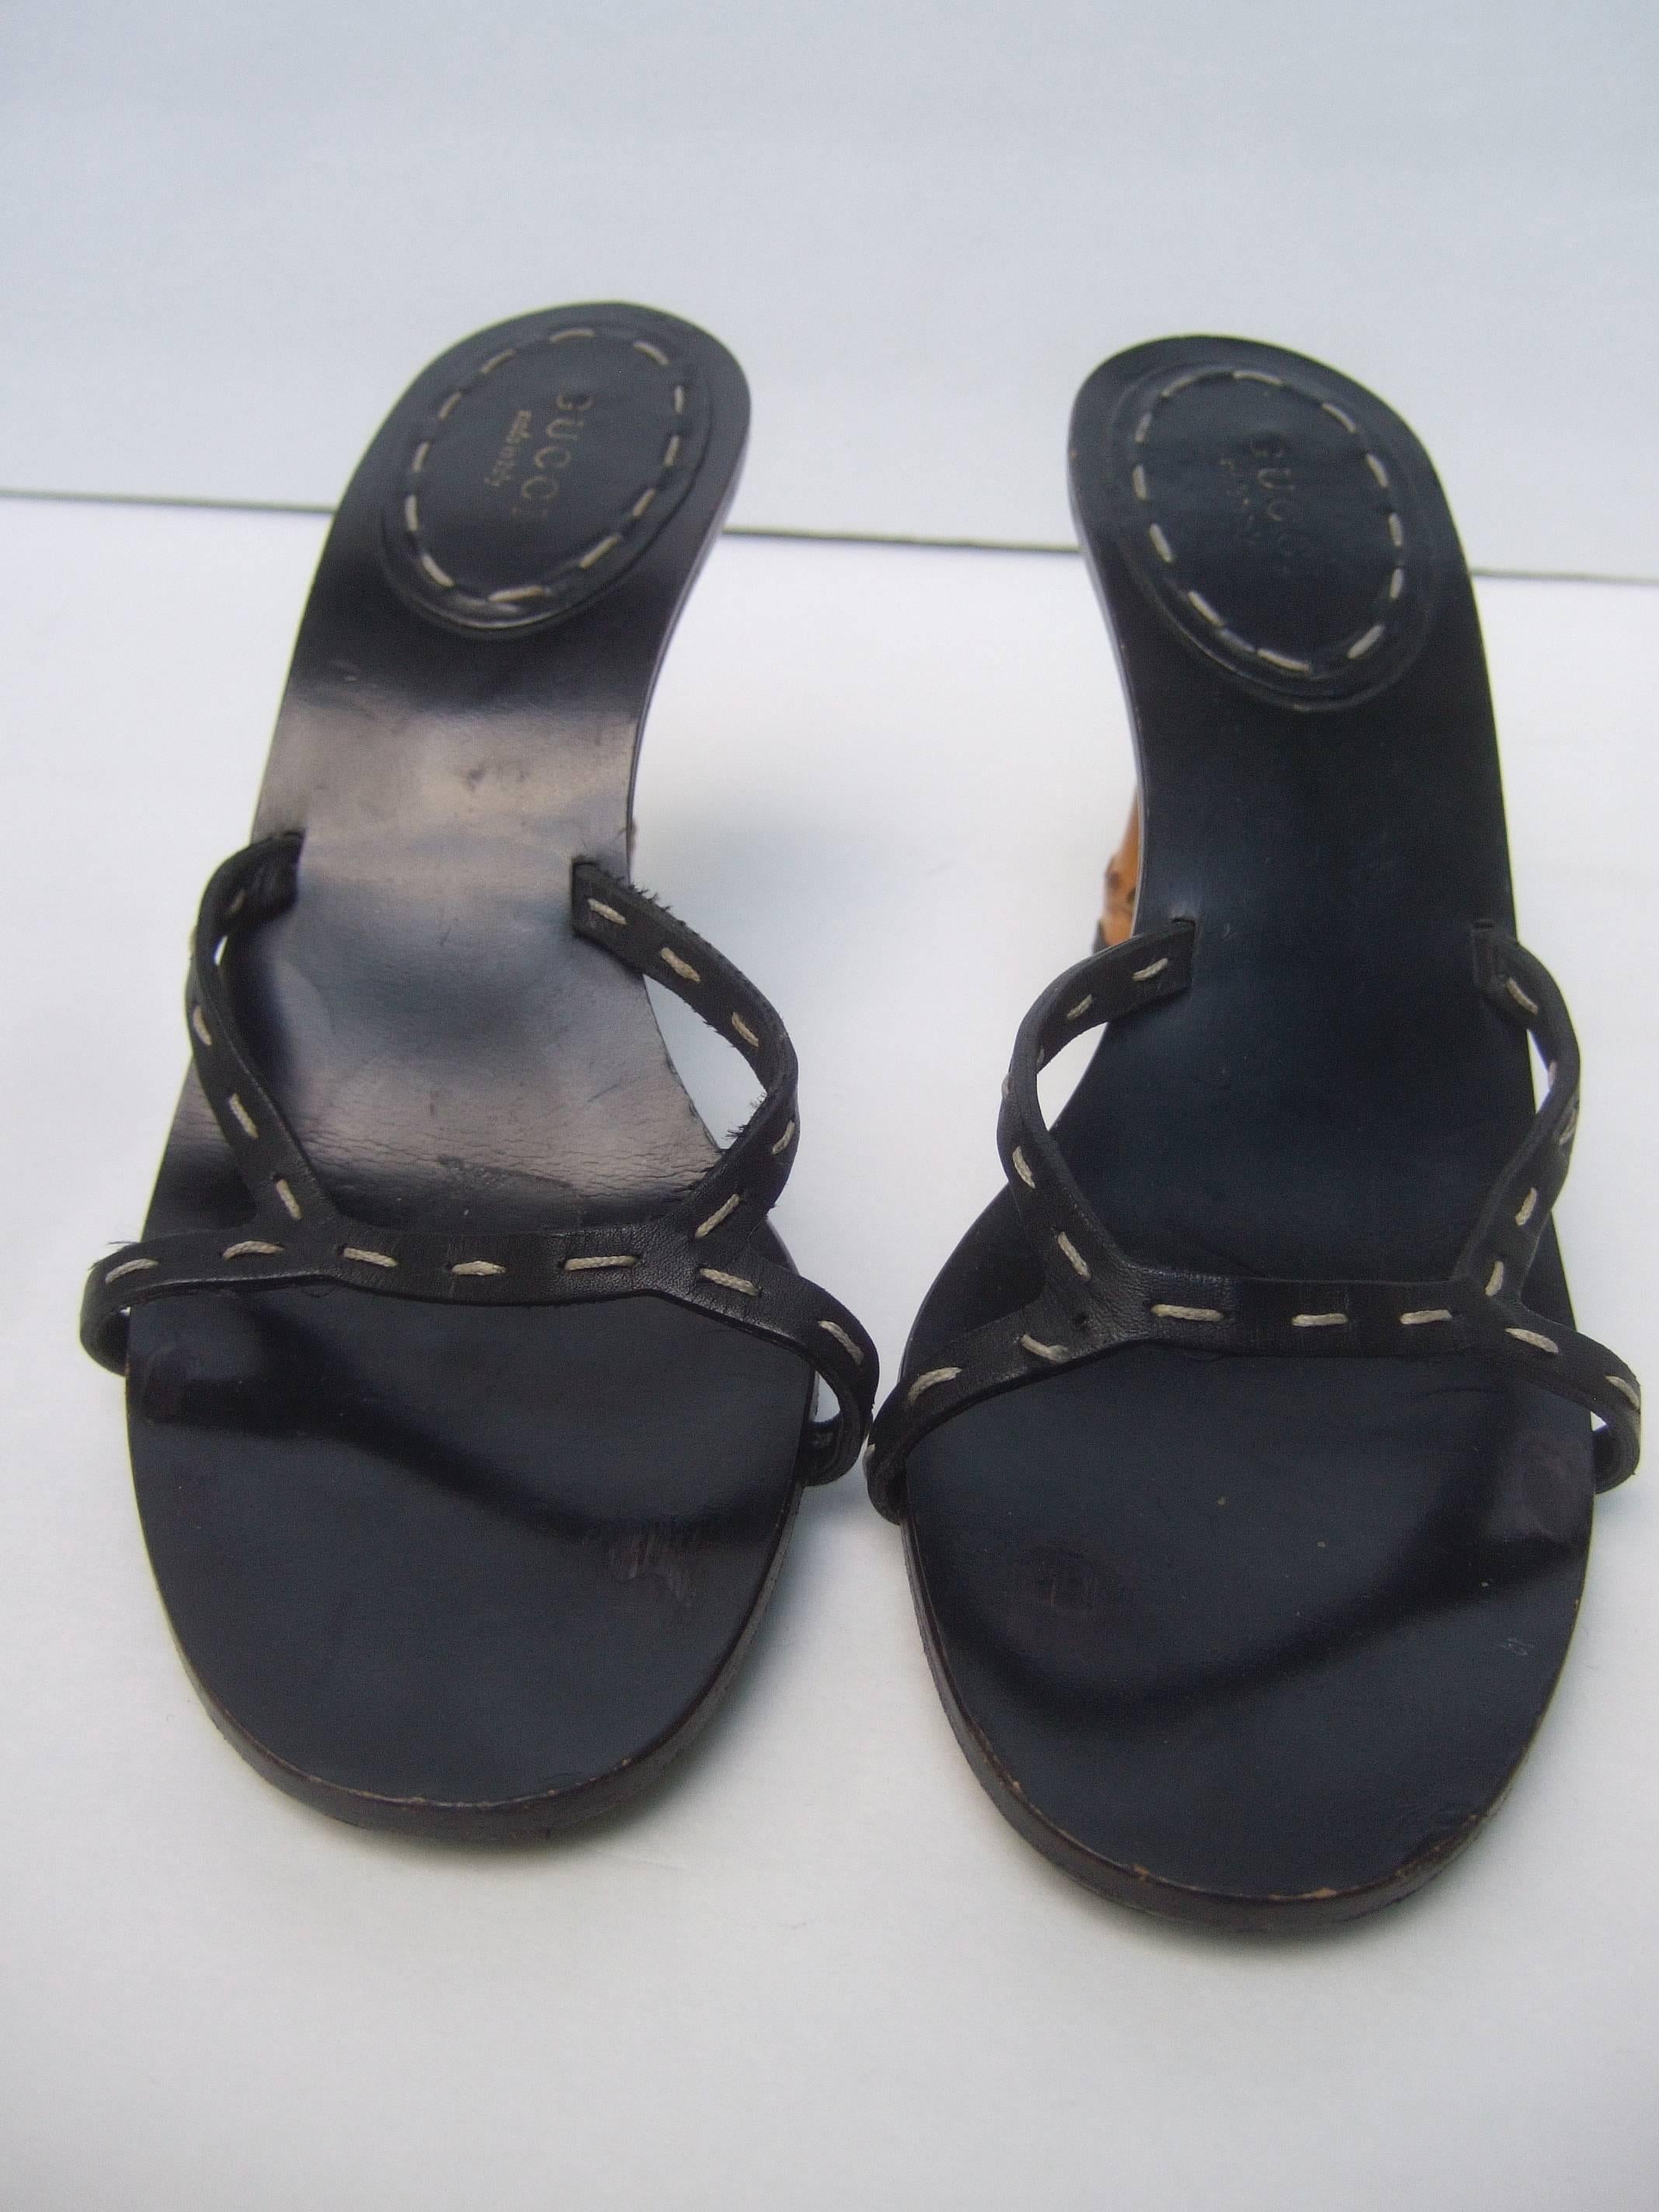 Gucci Italy Black Leather Bamboo Heel Sandals US Size 7B  1